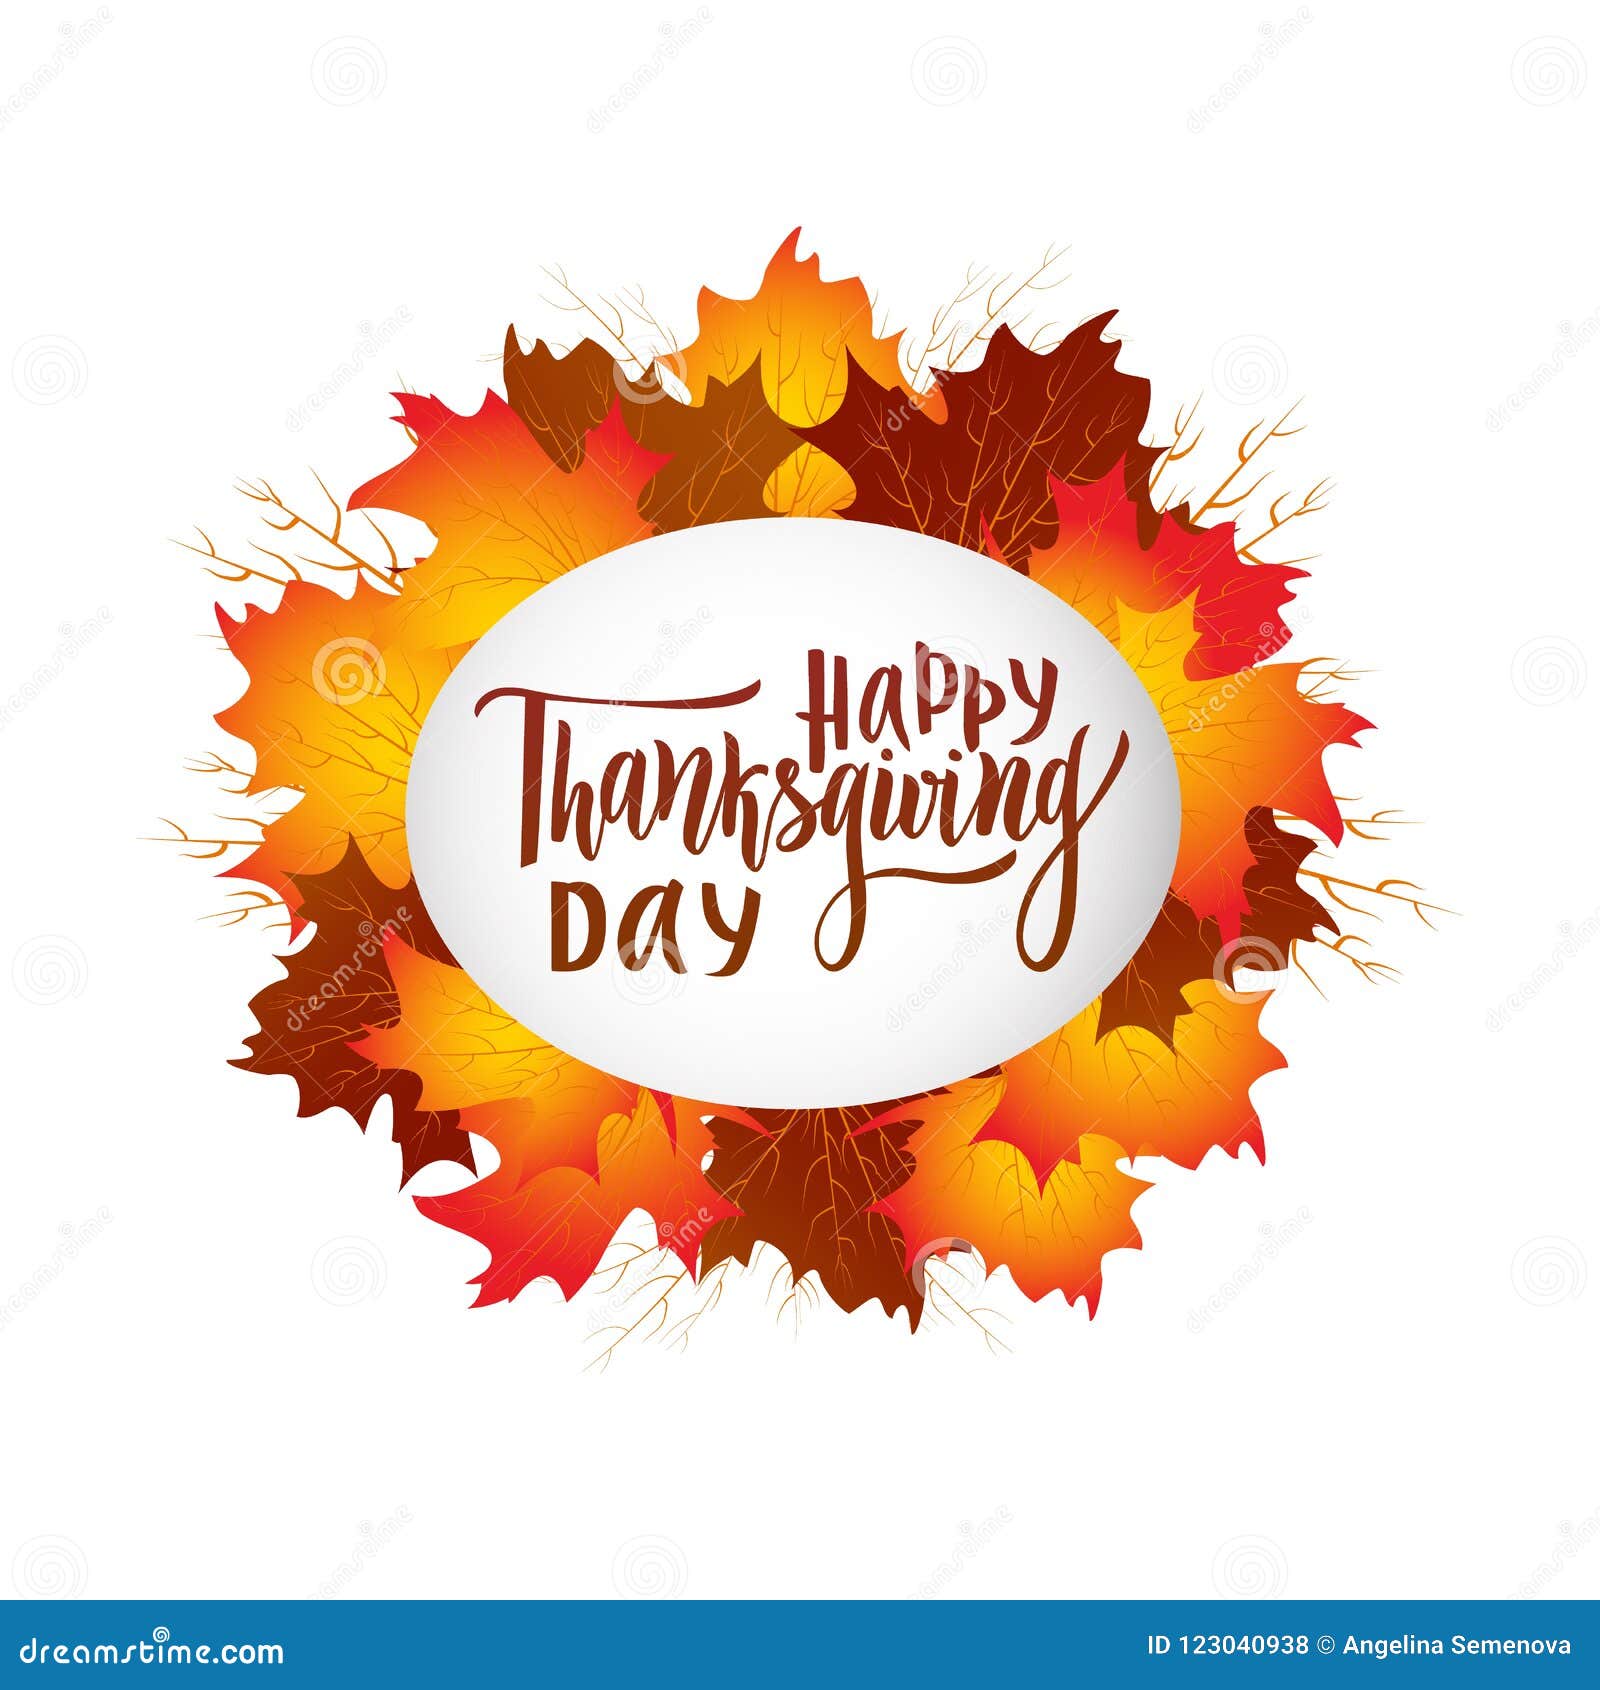 Happy Thanksgiving Day Greeting Lettering Phrase with Wreath. Modern  Calligraphy Stock Vector - Illustration of invitation, leaves: 123040938